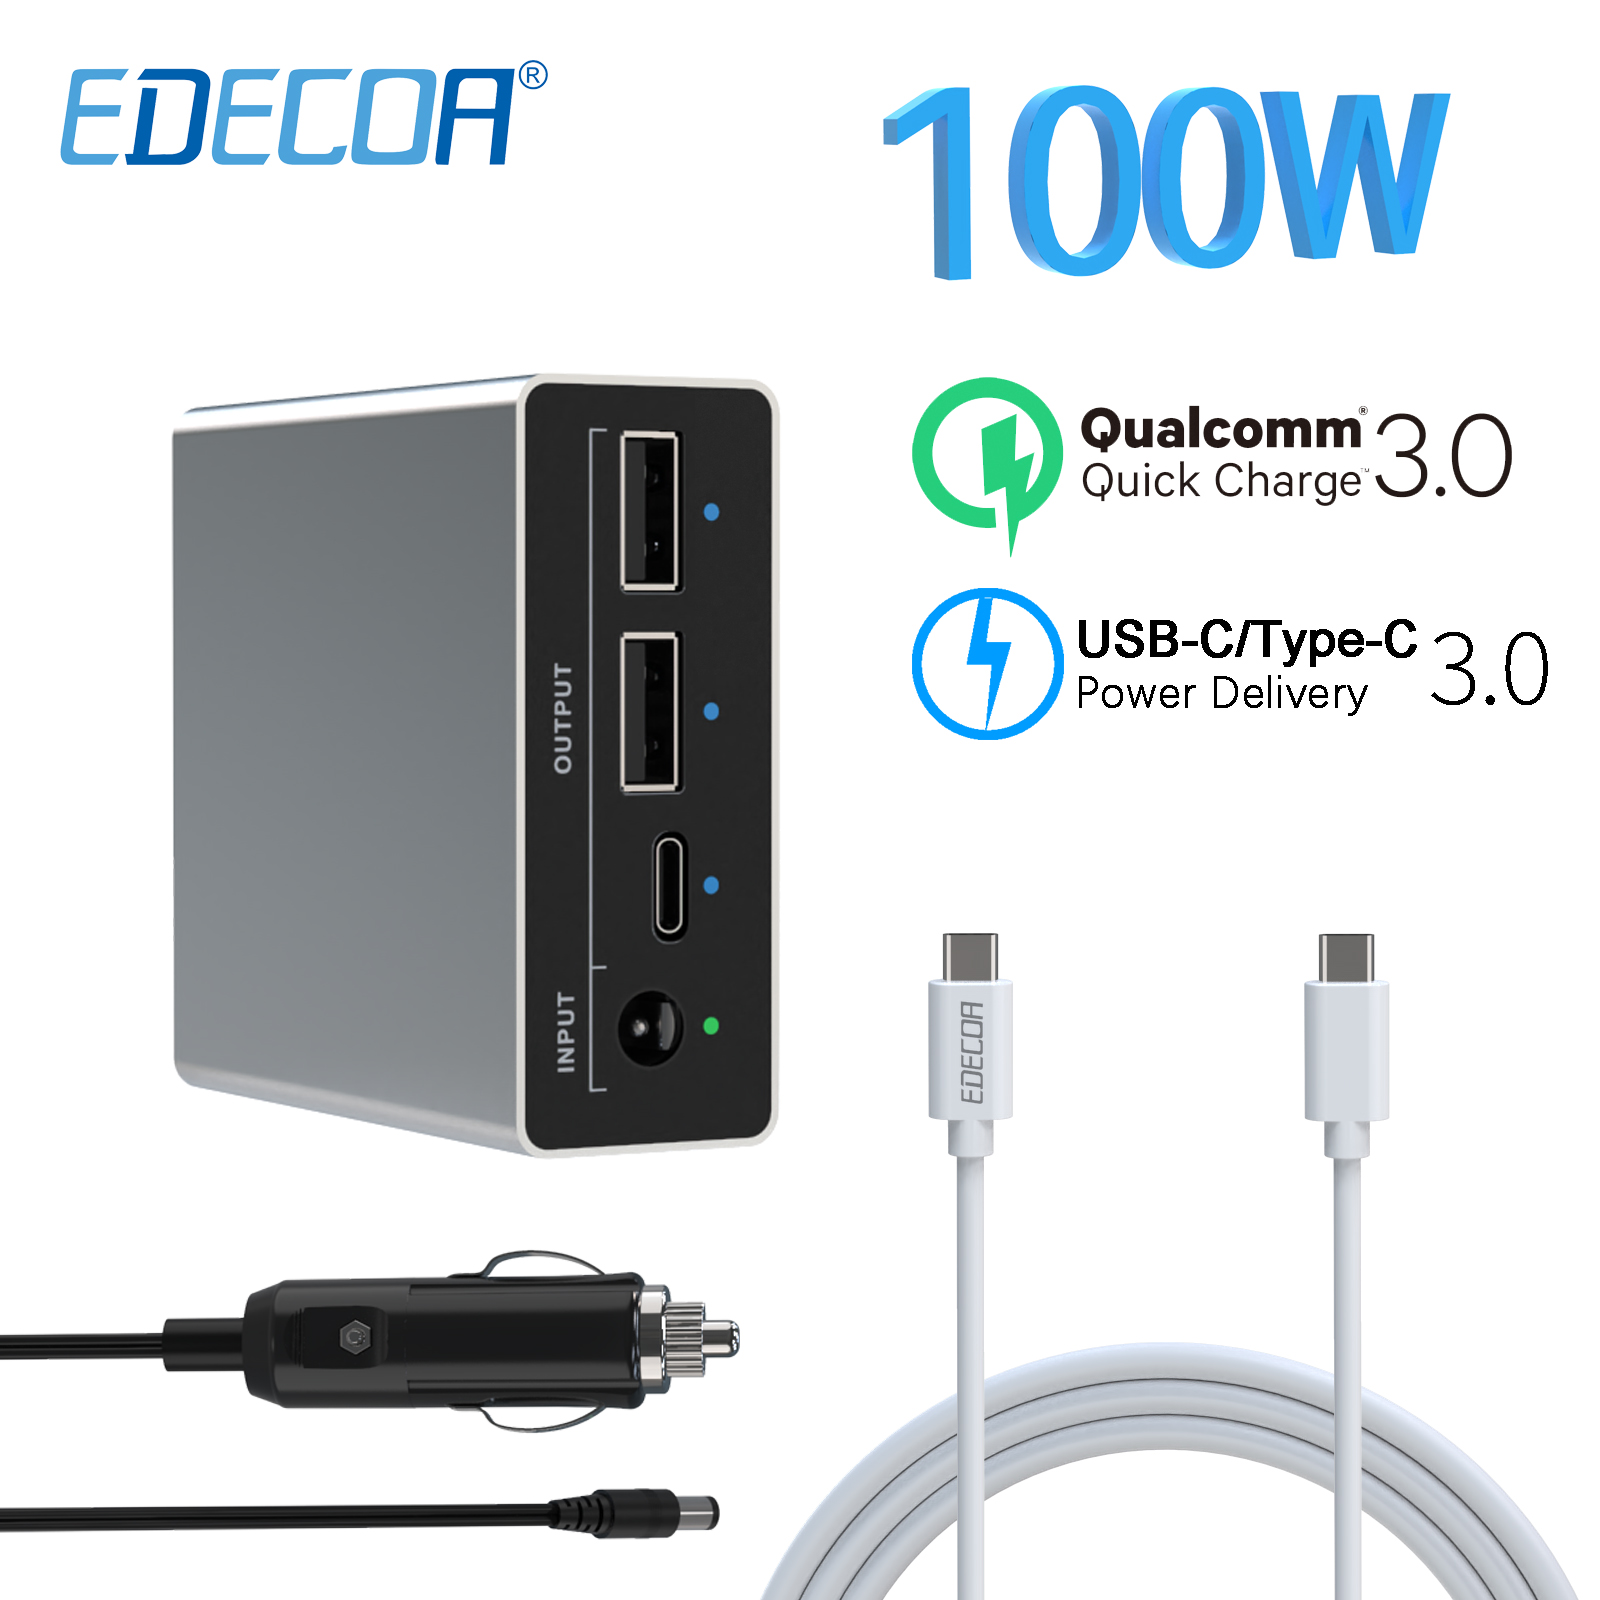 OEM/ODM Factory 8000 Watt Inverter - 100W 12V/24V USB C Car Laptop Charger  Universal 65W PD 3.0 Type-C Laptop Adapter Dual 2.4A USB QC 3.0  Fast-Charging for Phone Tablet – EDECOA manufacturers